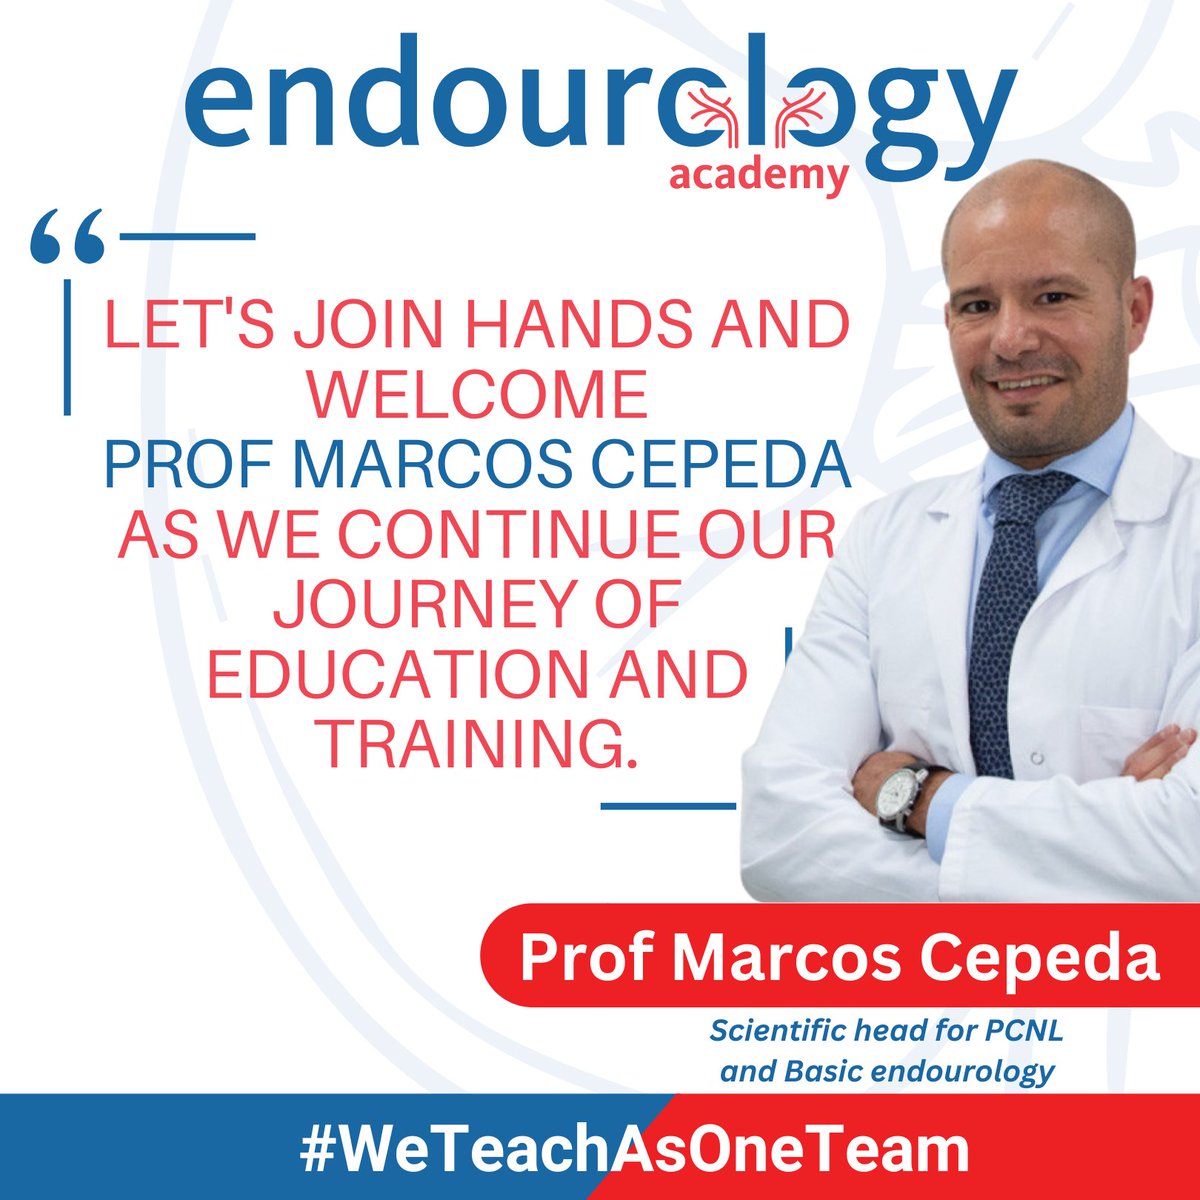 🎉 Exciting News! 📷 We are thrilled to welcome Prof @drmarcoscepeda the Endourology Academy family! 🌟 With their expertise, we're ready to push the boundaries of Endourology. Join us in giving them a warm welcome!